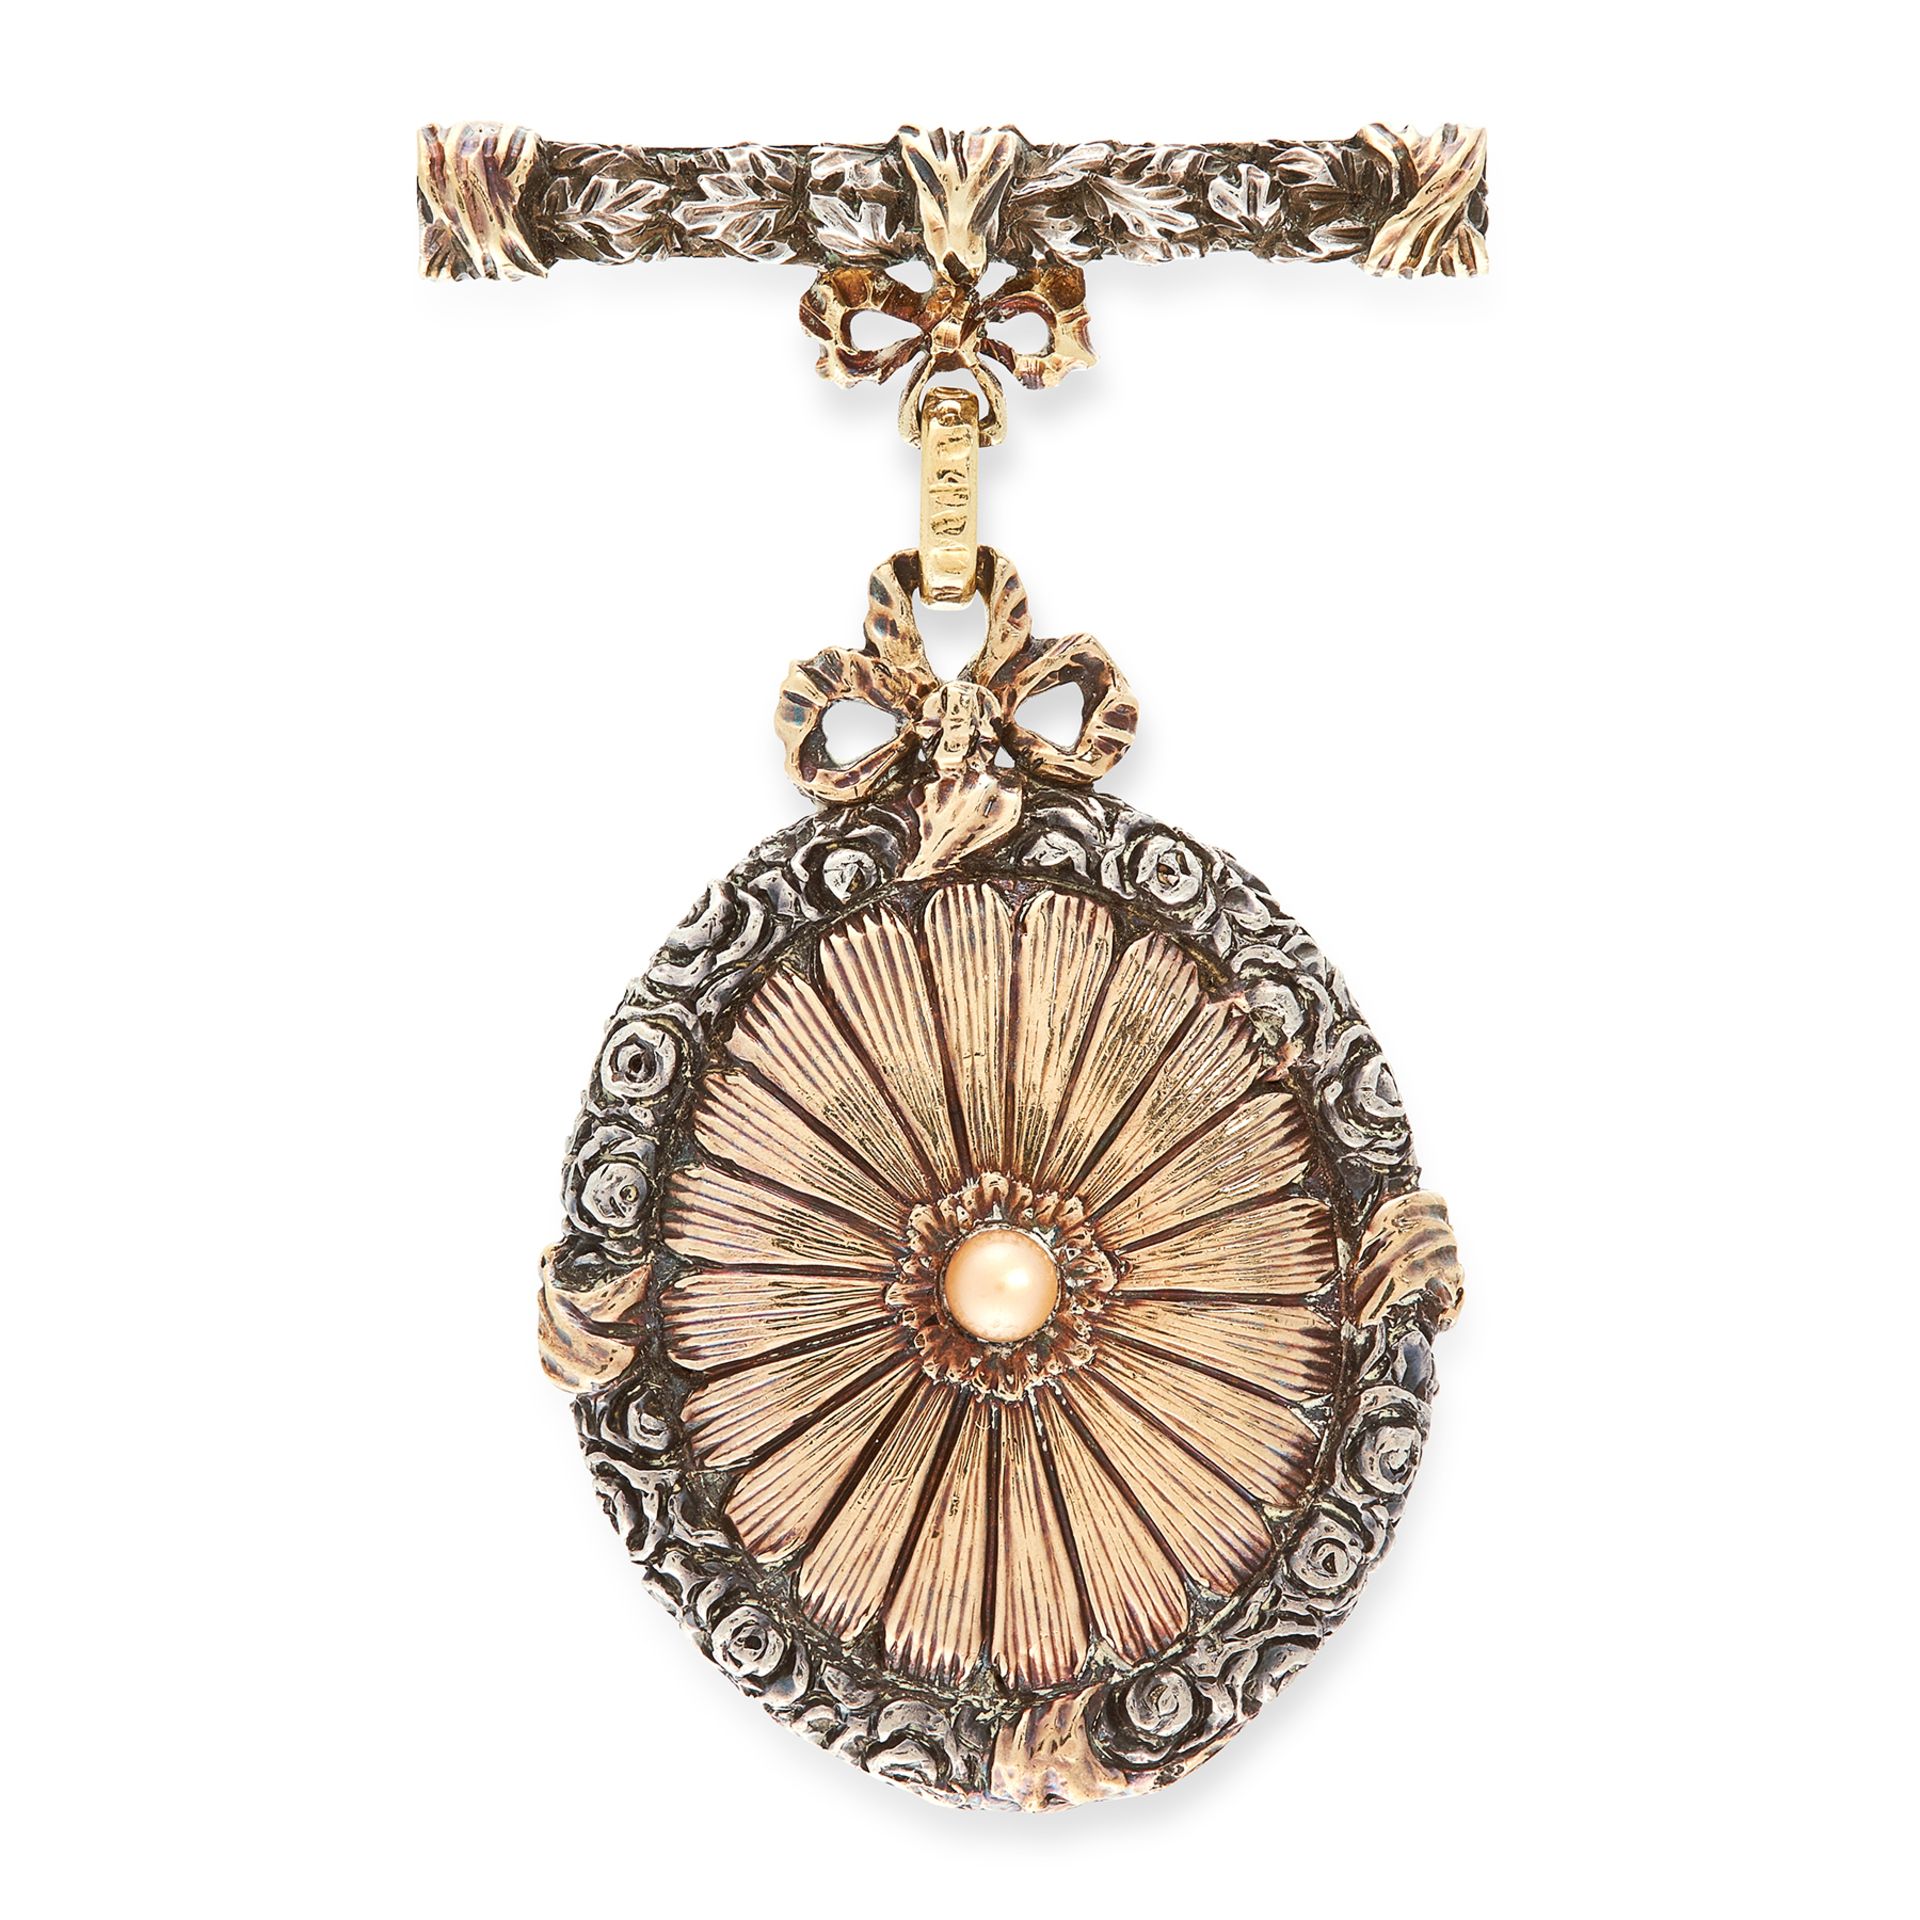 A PEARL MOURNING BROOCH, BUCCELLATI comprising of an ornate bar brooch suspending an oval shaped